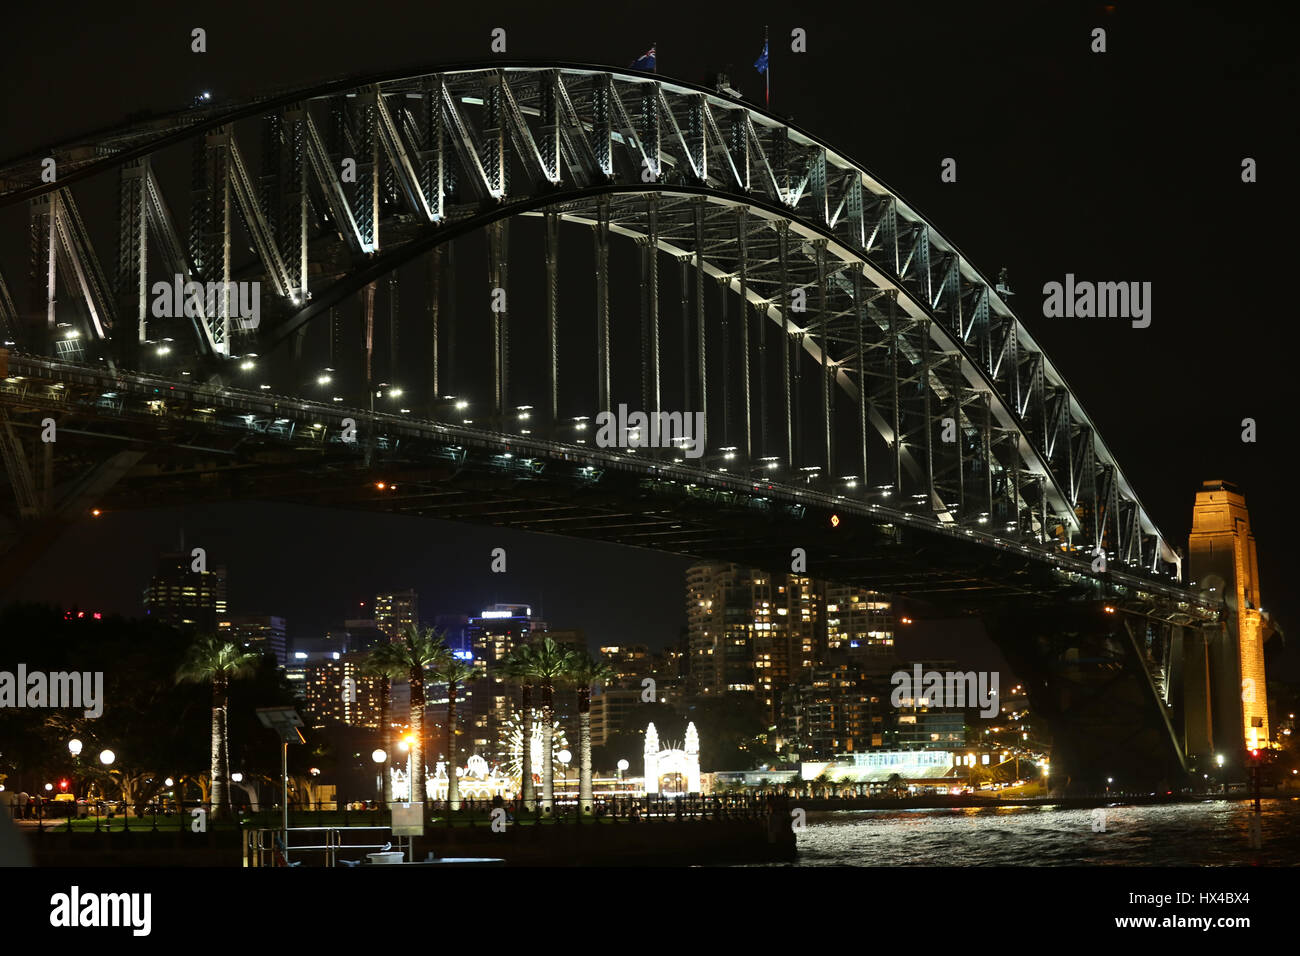 Sydney, Australia. 25 March 2017. The lights of the Sydney Opera House and the Sydney Harbour Bridge were turned off for one hour from 8:30pm to 9:30pm to mark ‘Earth Hour’. Pictured: Sydney Harbour Bridge just before Earth Hour. Credit: © Richard Milnes/Alamy Live News Stock Photo